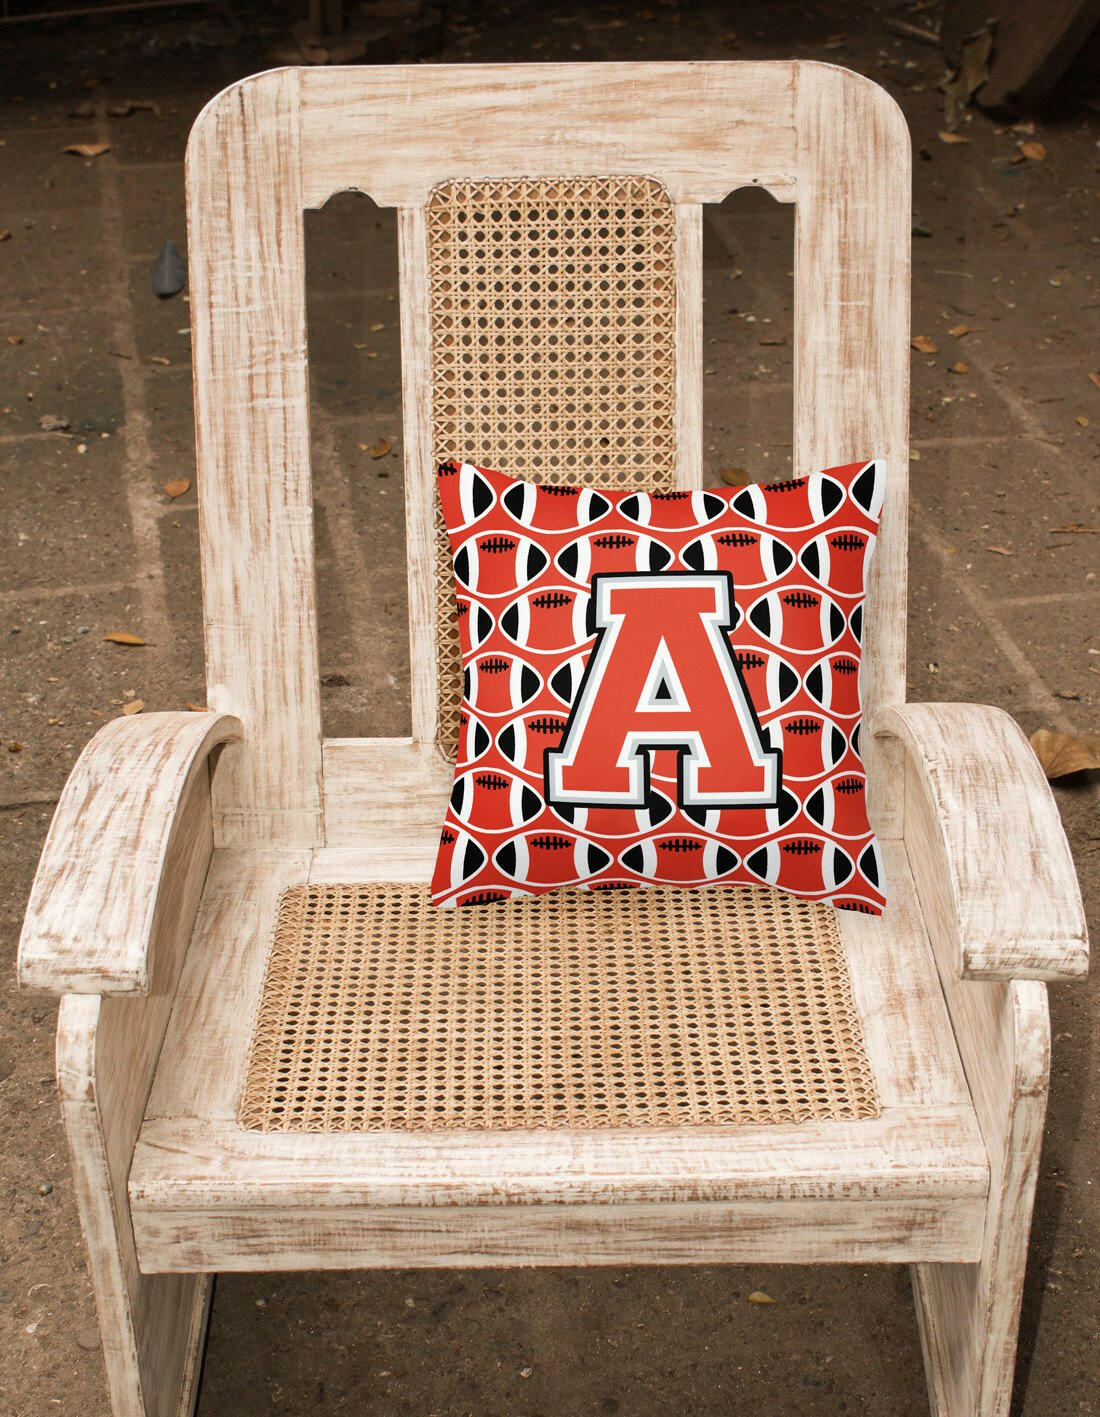 Letter A Football Scarlet and Grey Fabric Decorative Pillow CJ1067-APW1414 by Caroline's Treasures